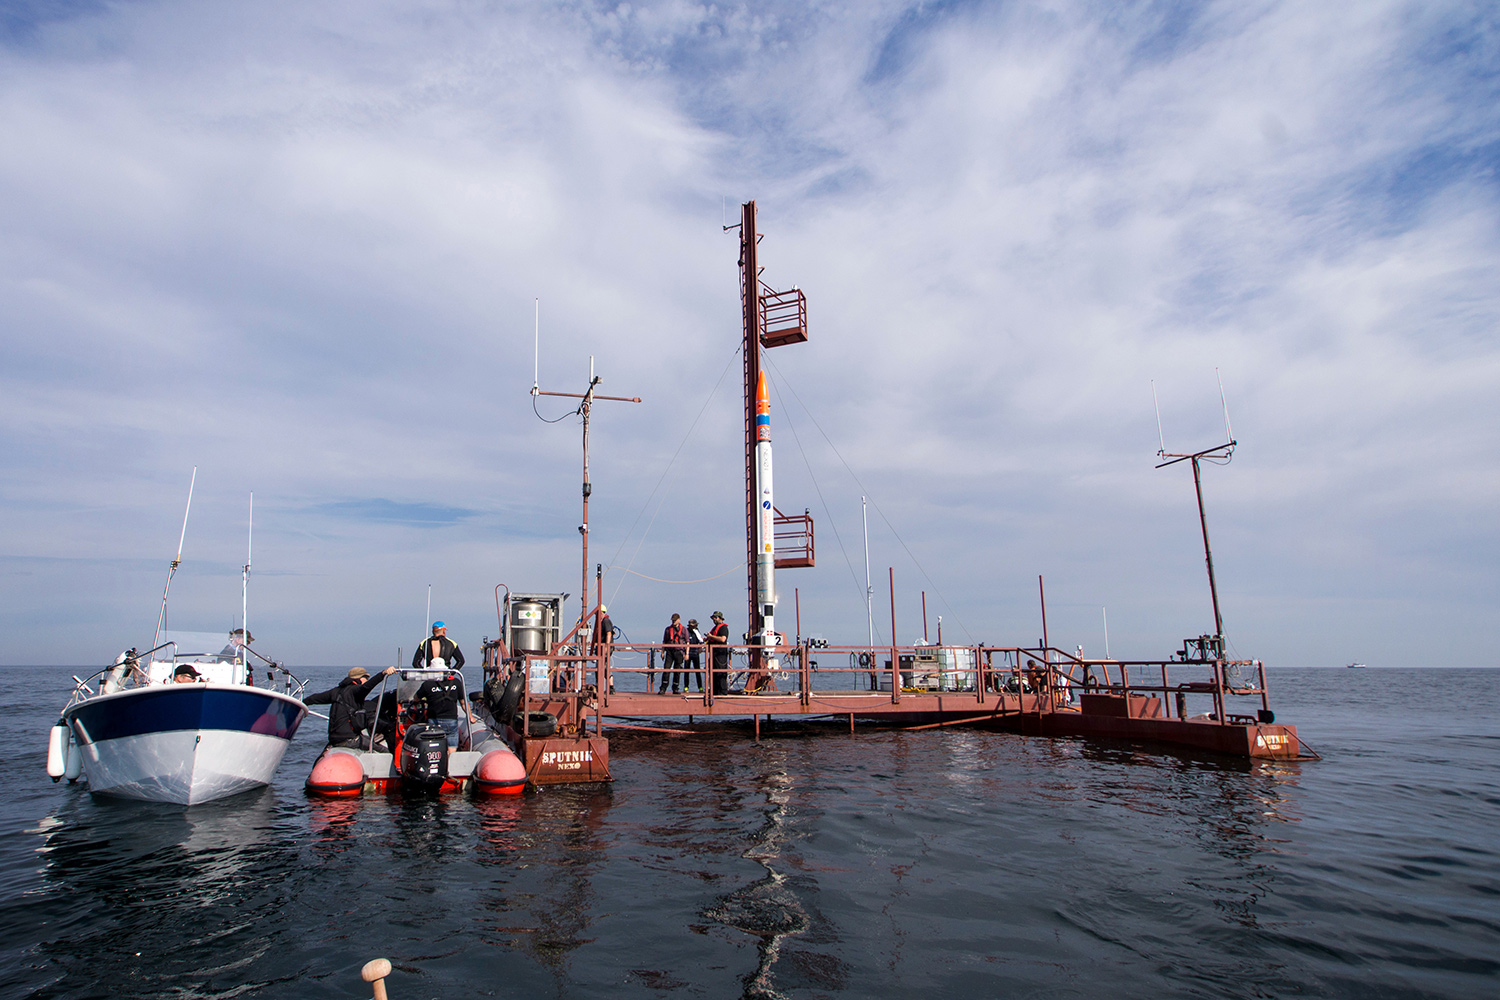 rocket on water-borne platform with boats and people